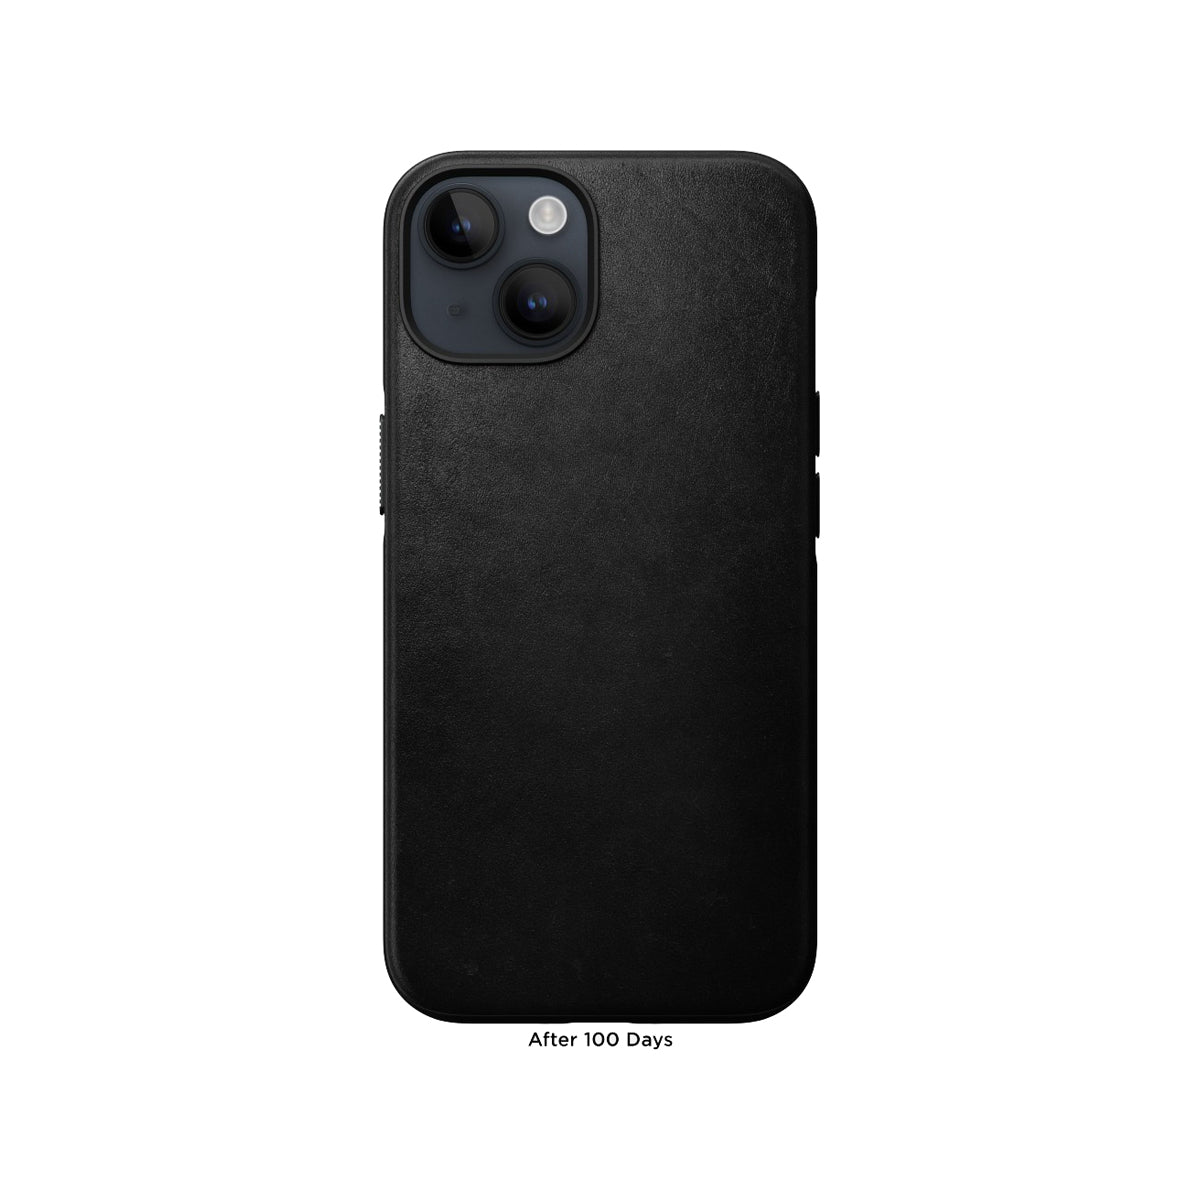 Nomad Modern Leather Phone Case for iPhone 14 - Black Normal Leather.